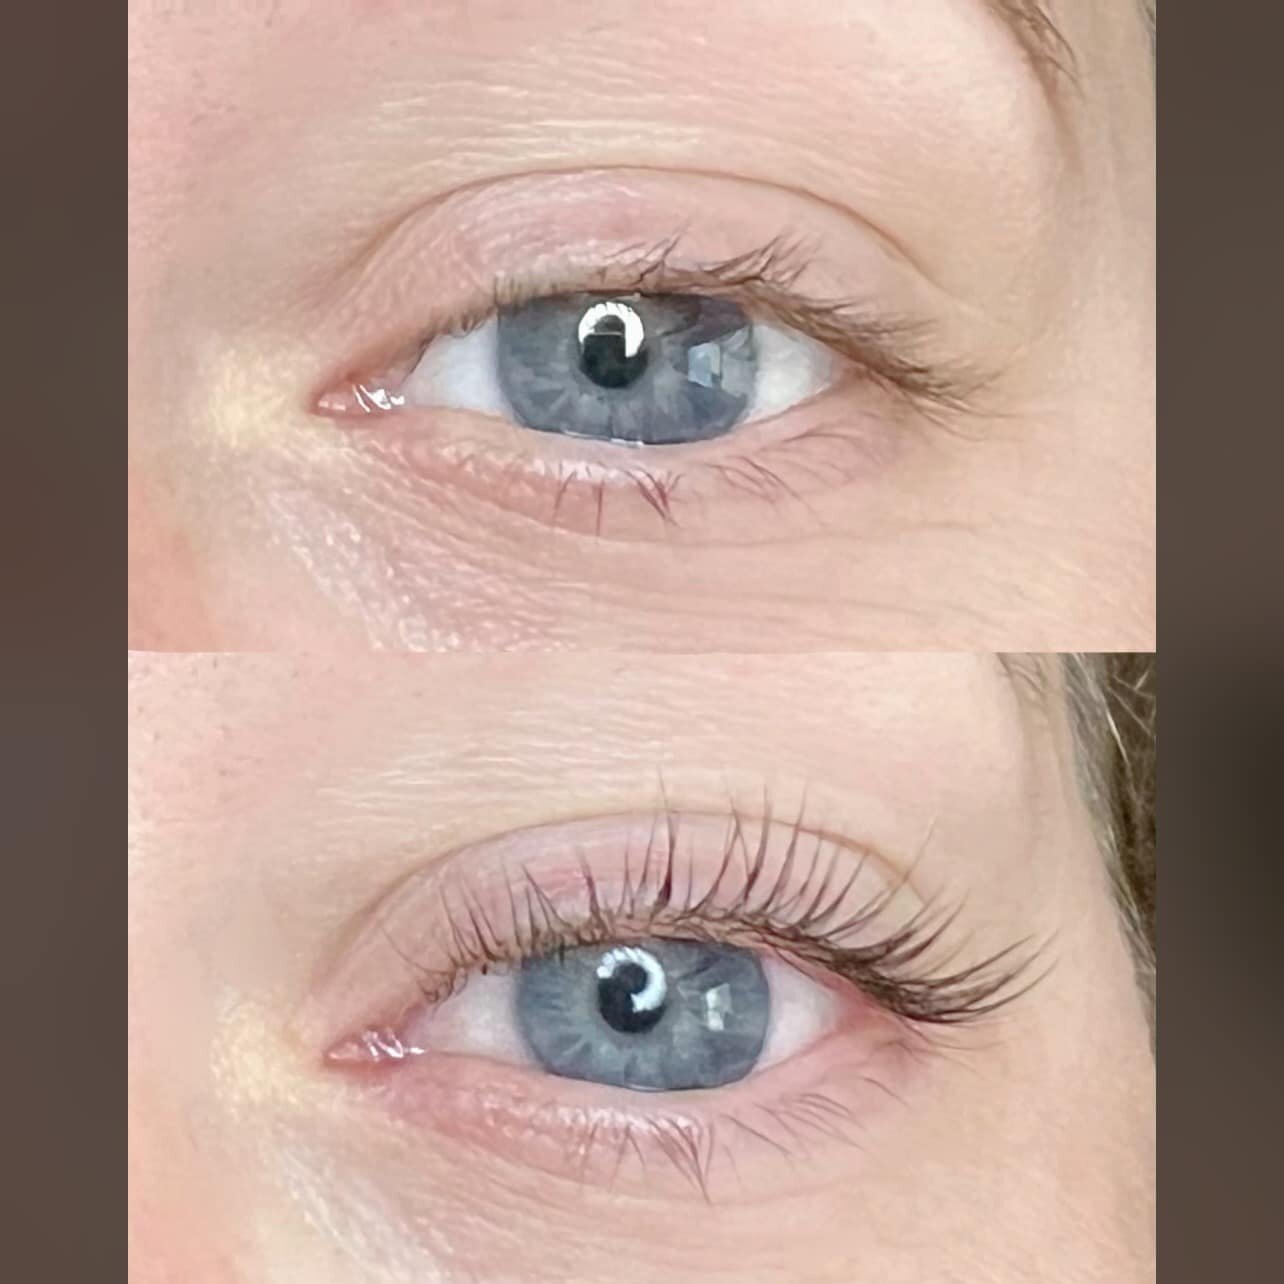 ✨LASH LIFT&amp;TINT✨ The treatment is your own natural eyelashes curled, lifted, and darkened.

✅ The eyes look more defined
✅ It lasts about 4-6 weeks
✅ The treatment takes about 1hr
✅ Perfect for vacation &amp; everyday life

BOOK ONLINE or CALL/TE